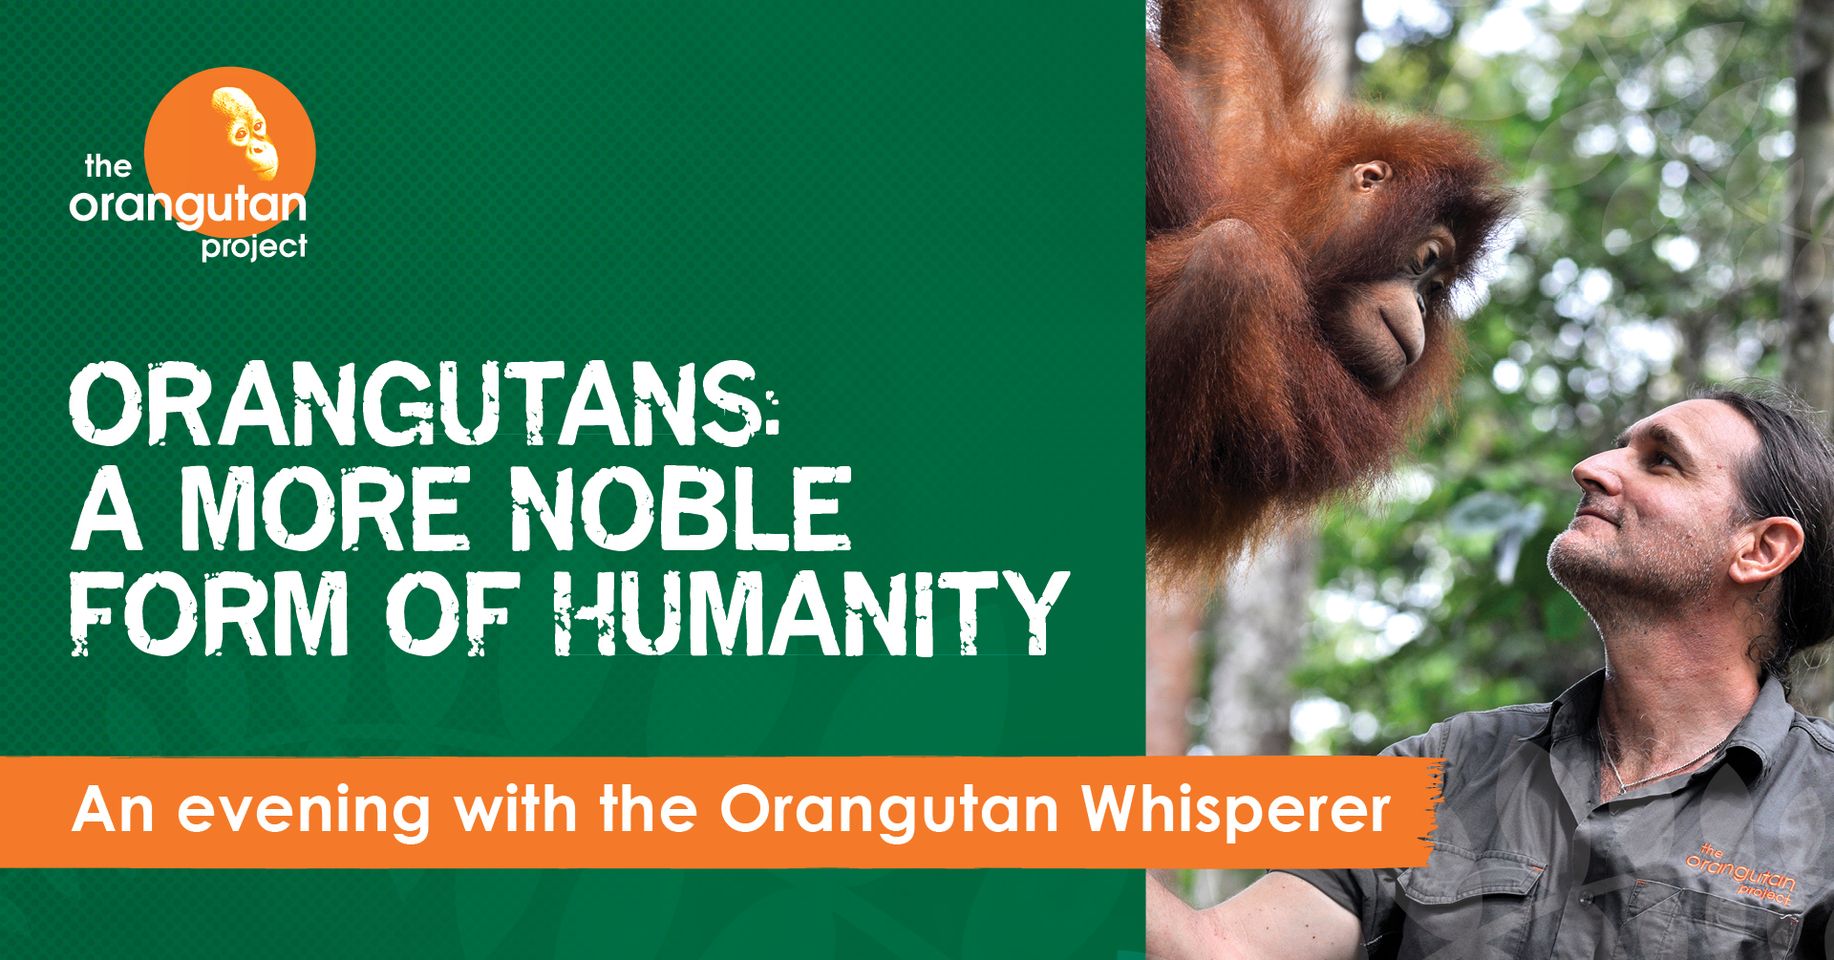 Orangutans: A More Noble Form of Humanity - Singapore